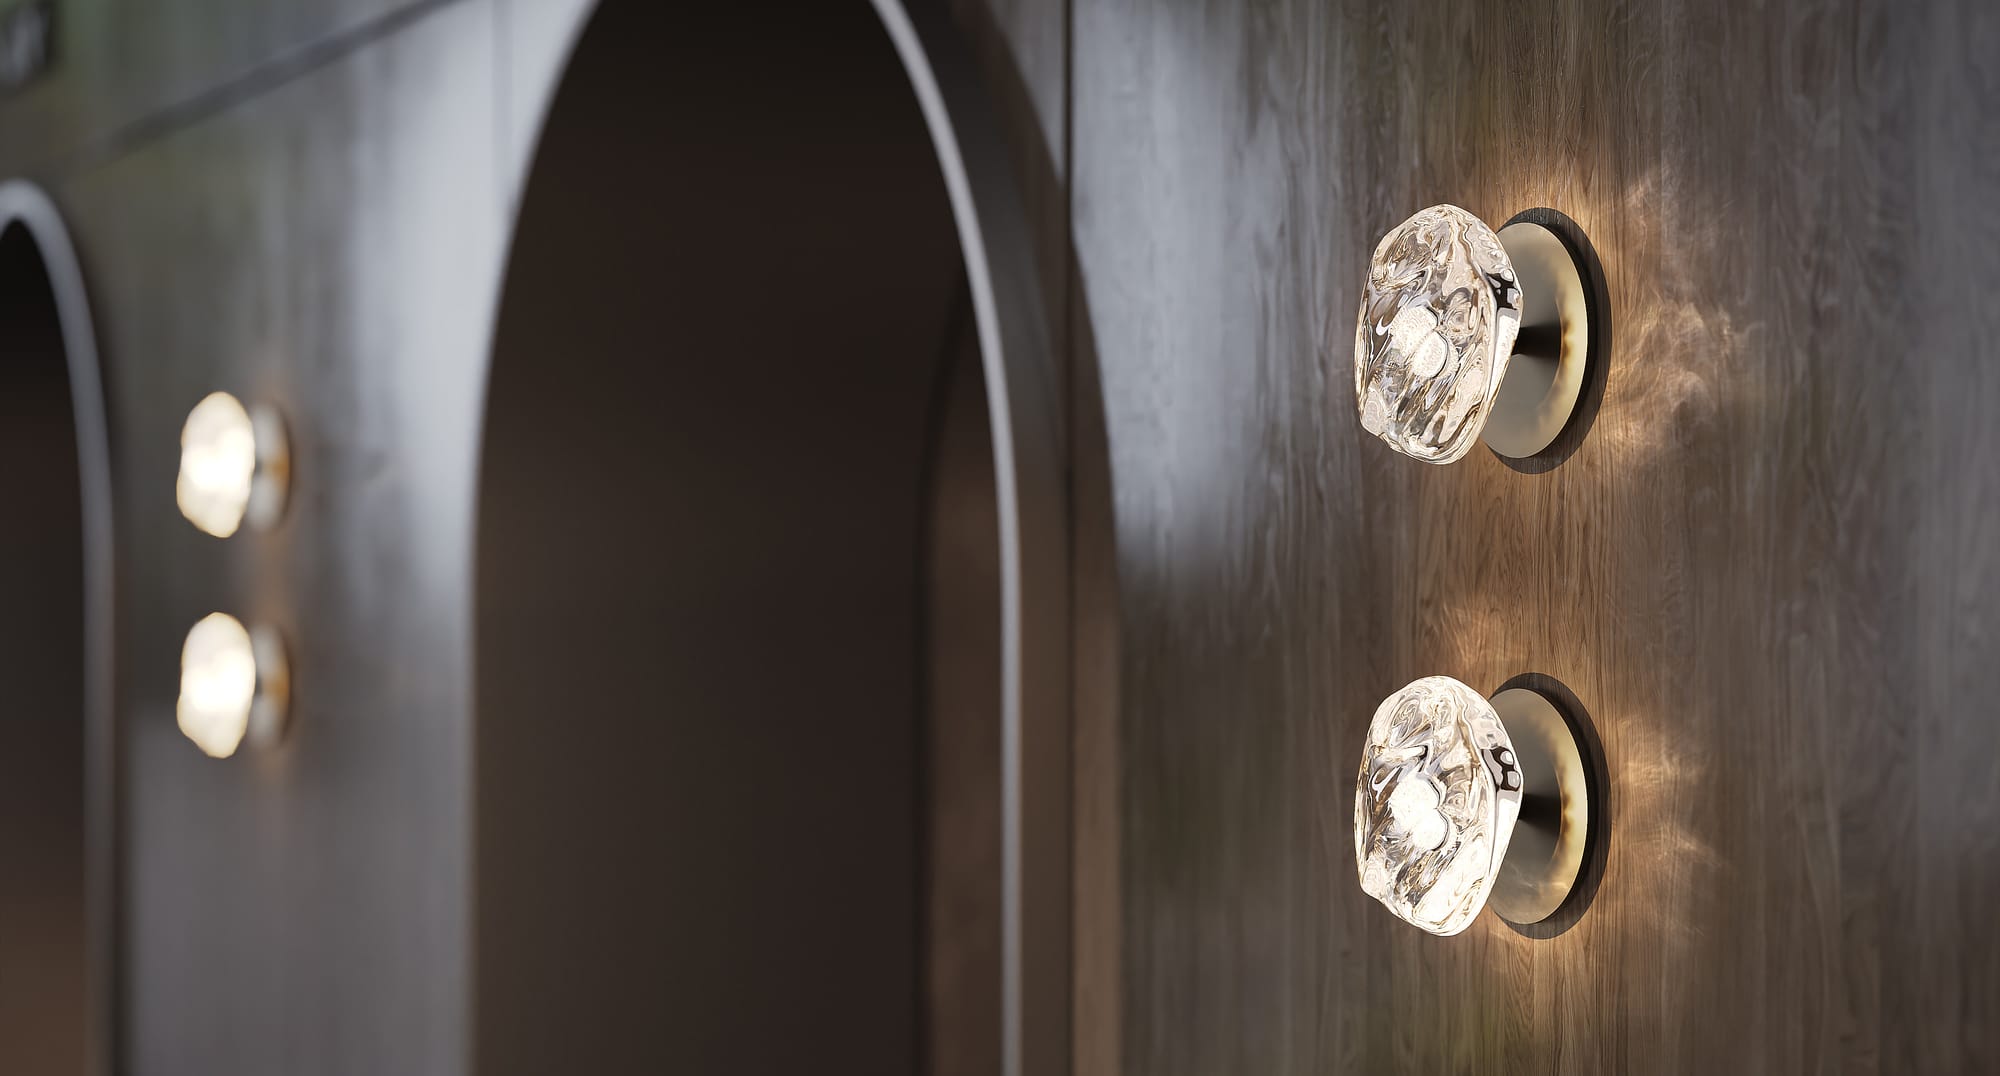 FLO Round Wall Light by SOKTAS. Copyright of SOKTAS. Close up of organically shaped wall sconces made of glass, mounted on dark timber wall. 